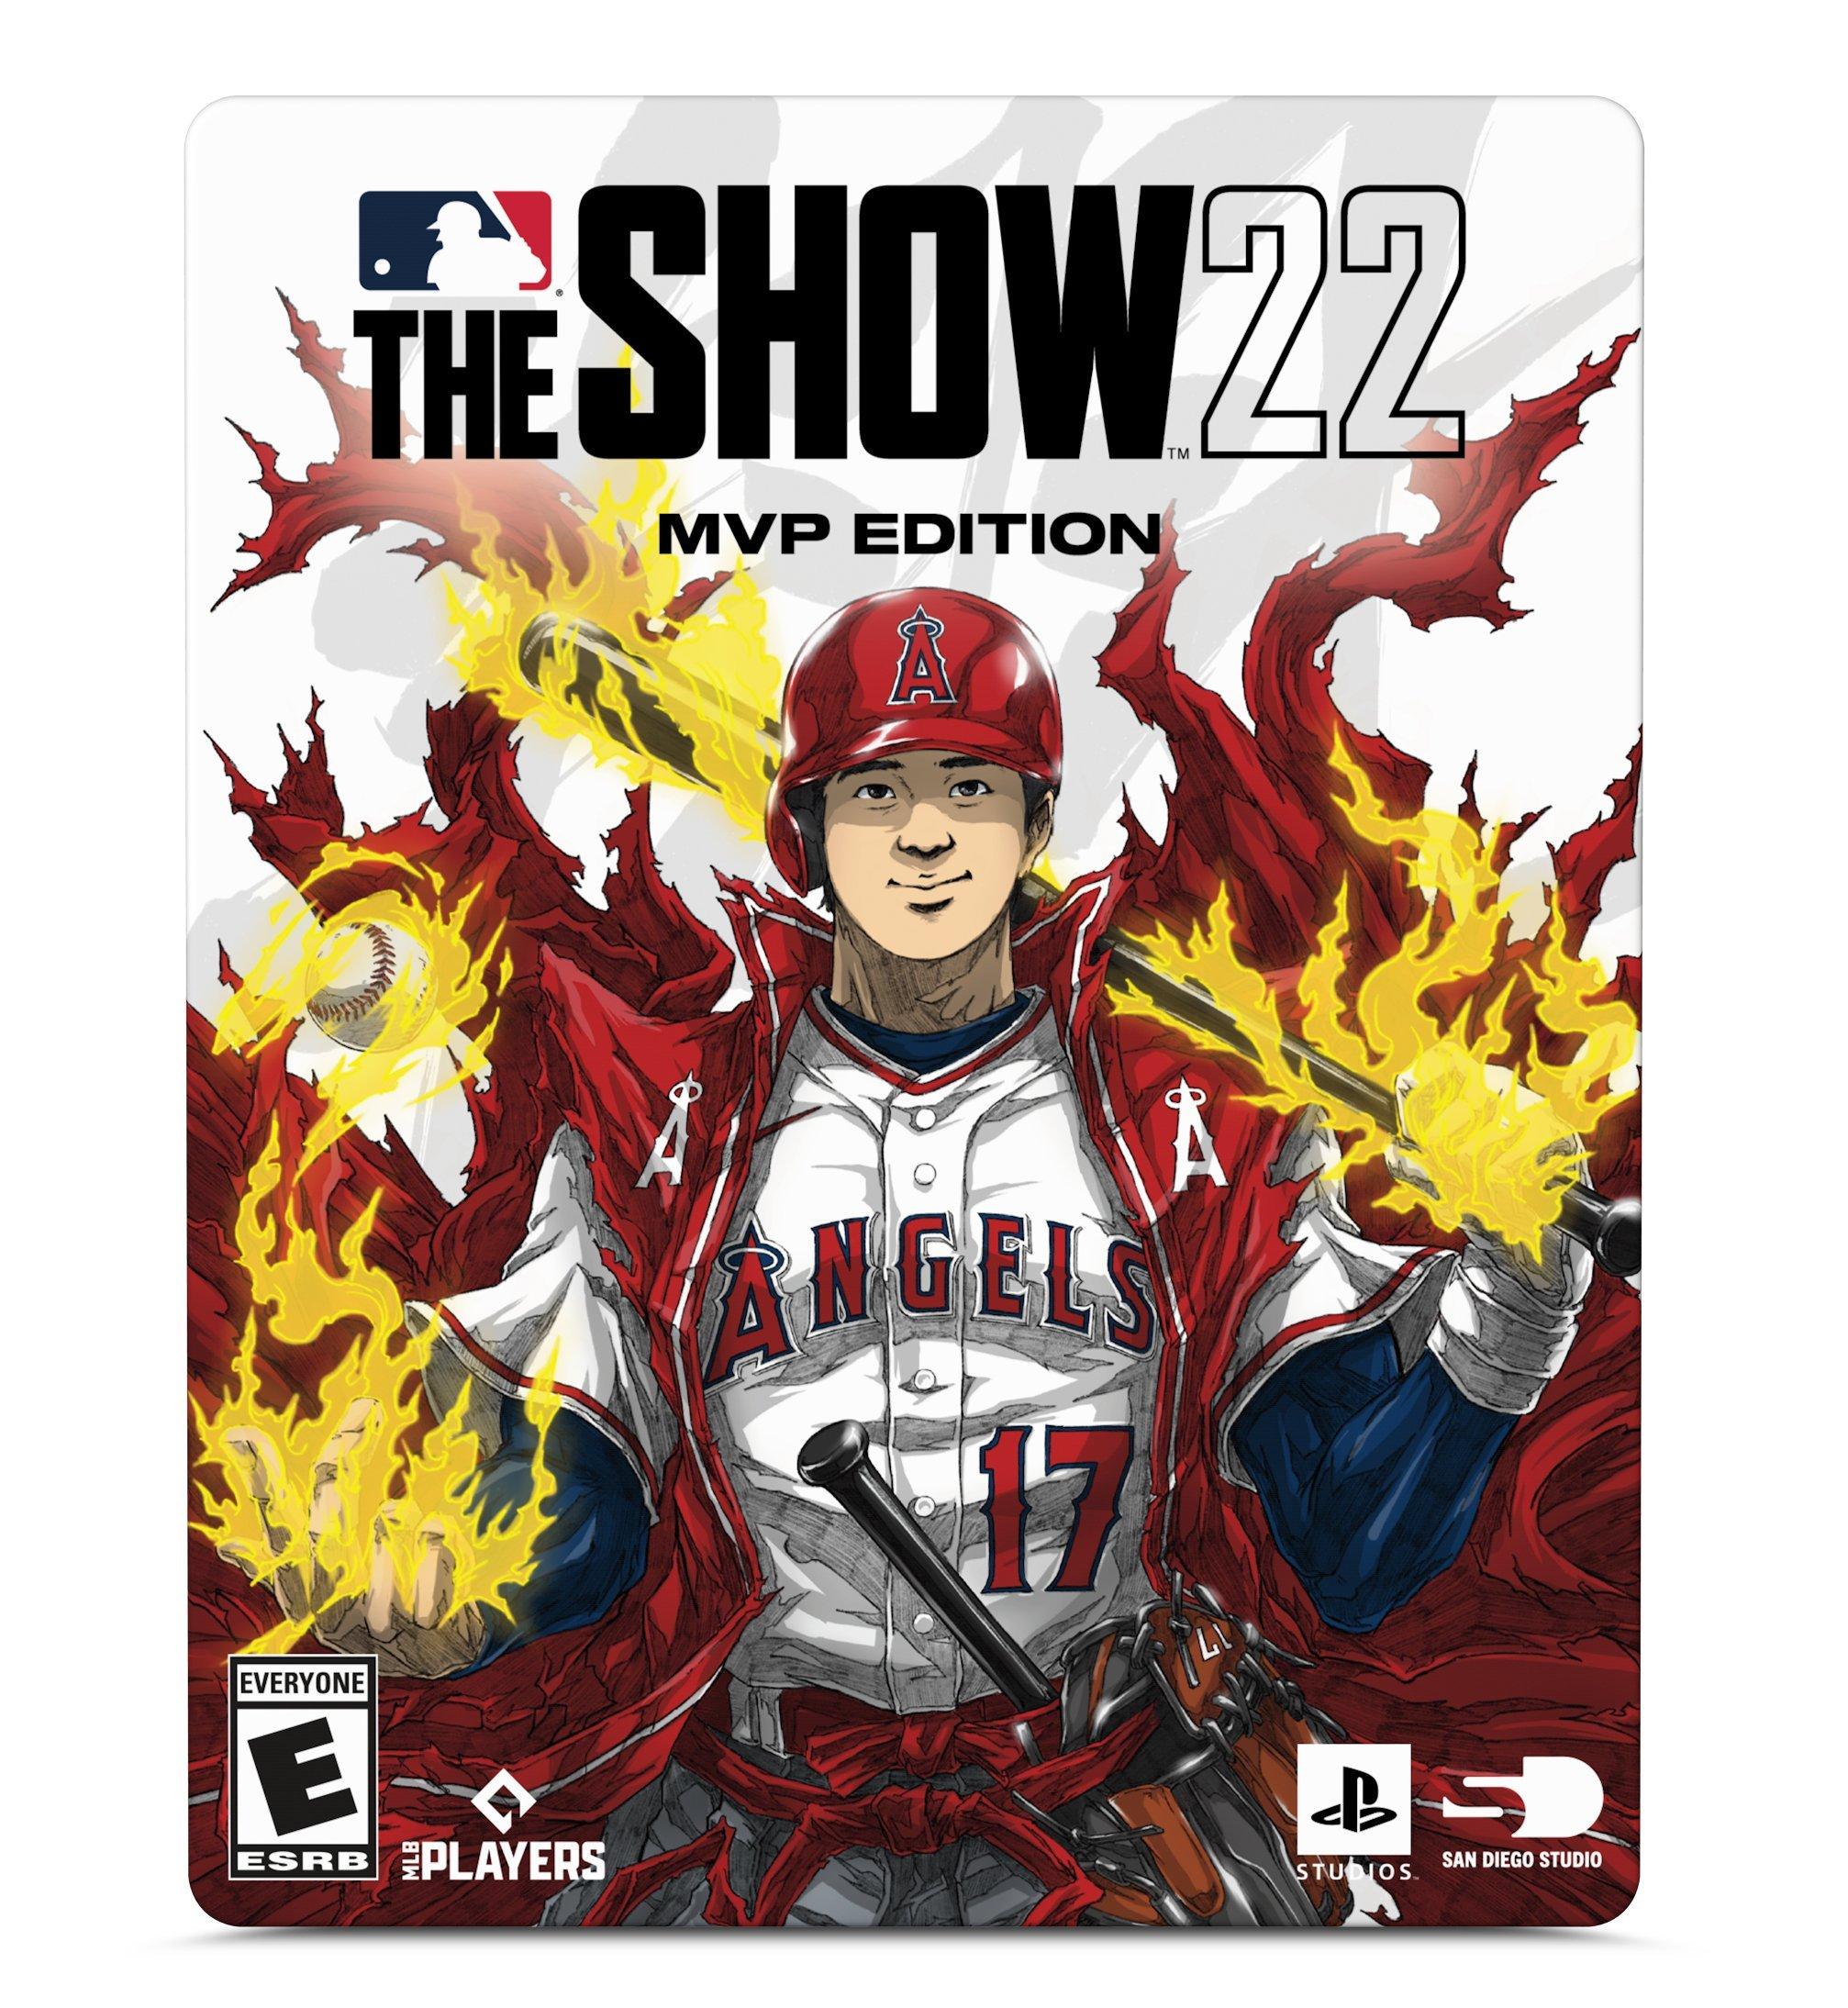 UPDATED* MLB The Show 21 Editions: Price, Rewards, Jackie Robinson, Digital  Deluxe, Next Gen & more